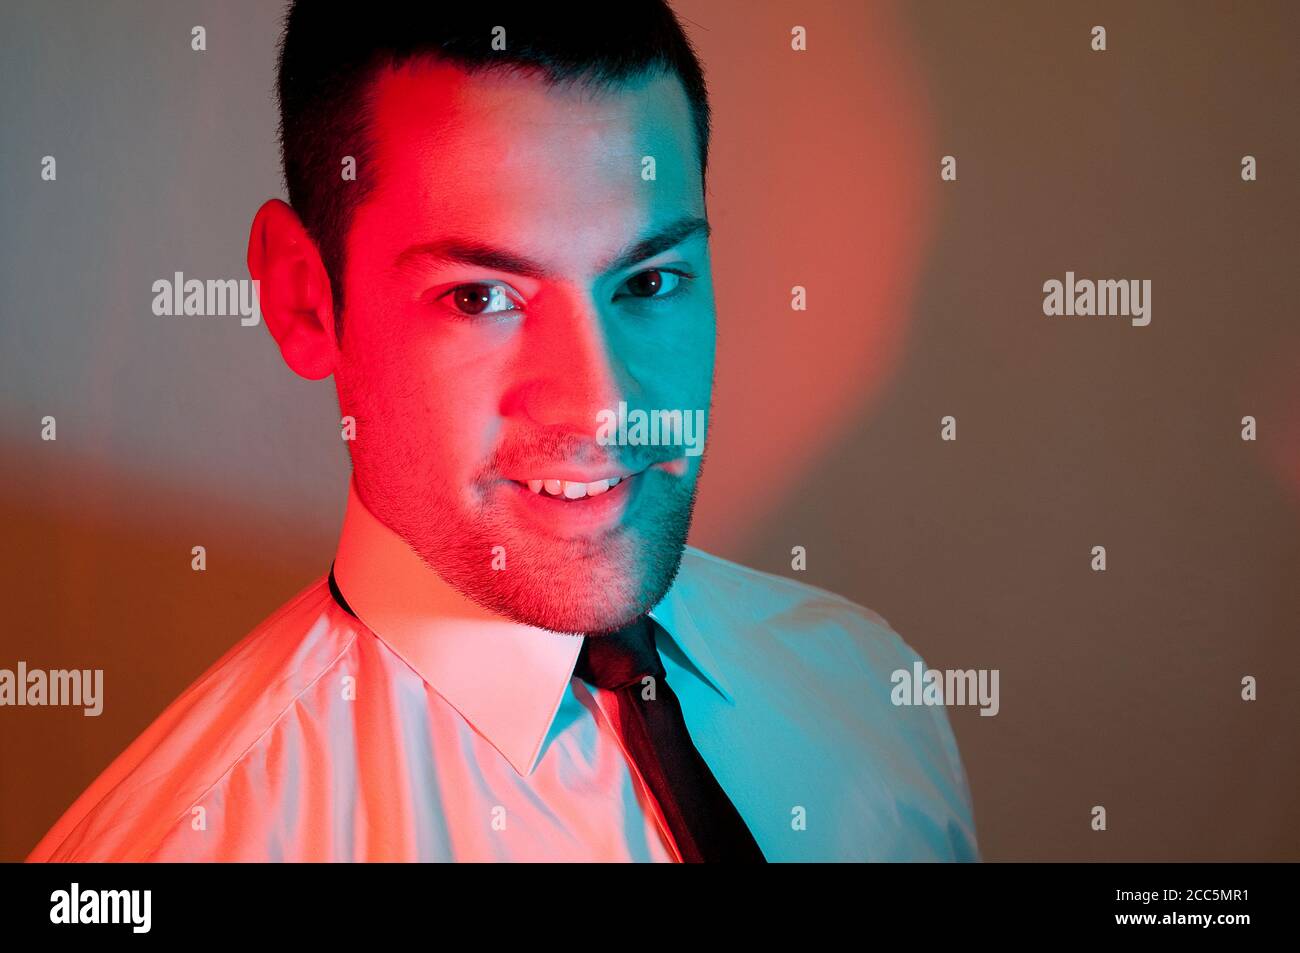 Young executive smiling and looking at the camera. Stock Photo